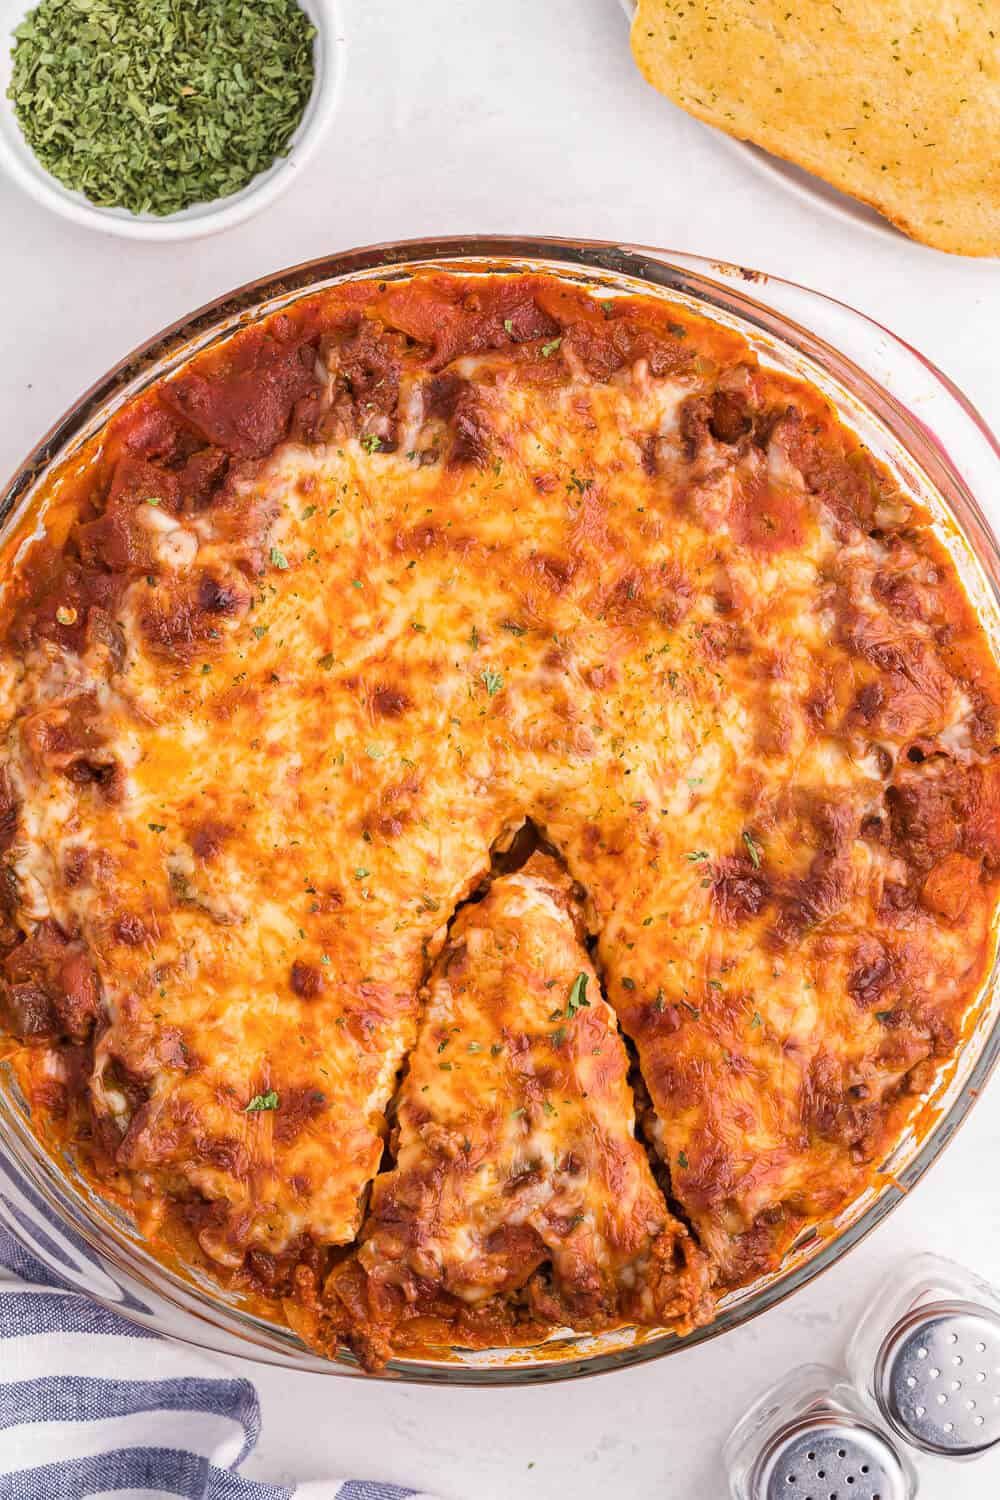 Spaghetti Pie - Lasagna + spaghetti = a big family hit! Using simple pantry ingredients, along with ground beef, and chili powder, this is a delicious crowd-pleasing meal.